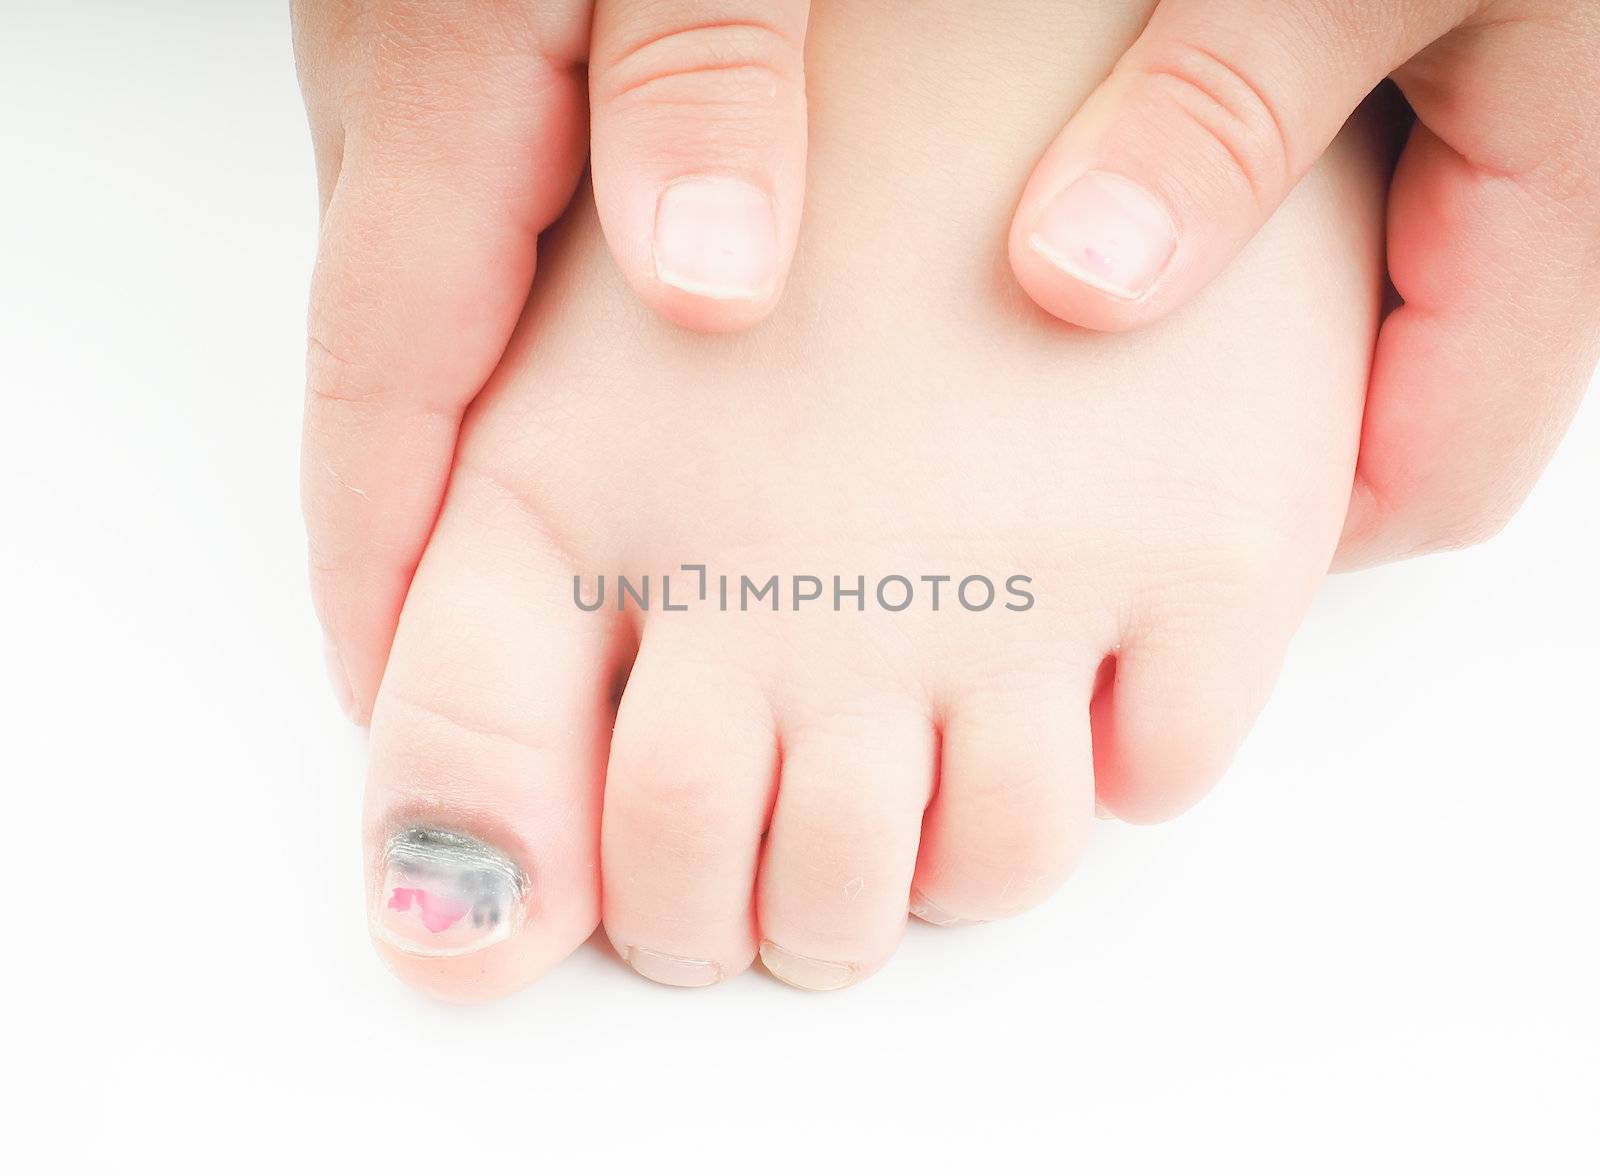 Little girl with a blue nail on hallux toe by Arvebettum